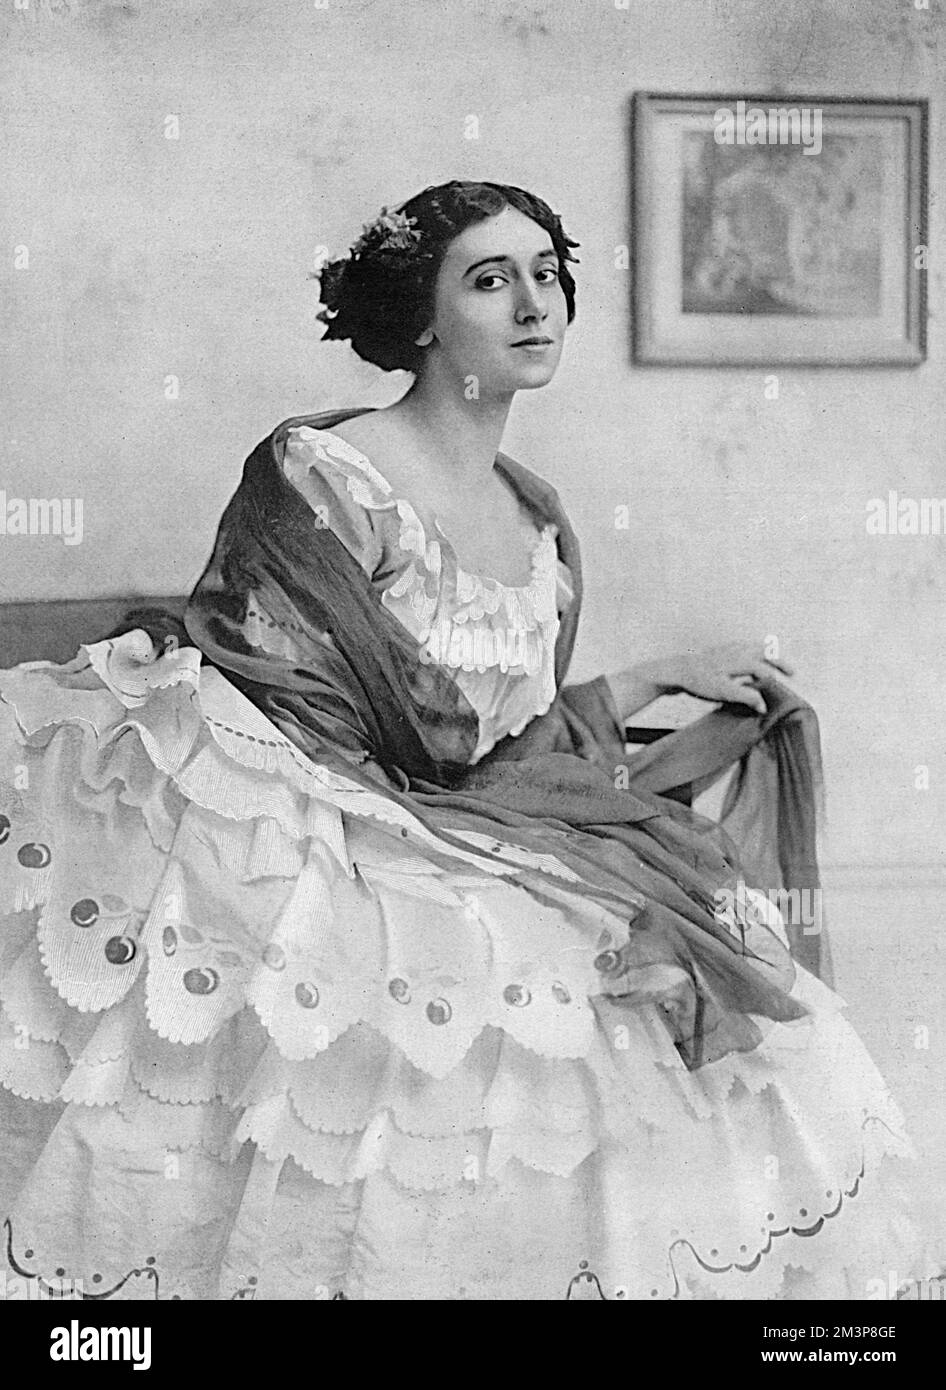 Tamara Karsavina (1885 - 1978), Russian ballerina, who danced at the Drury Lane theatre, London, from May to July 1914 in a season of opera and ballet overseen by Sir Joseph Beecham. She later married British diplomat Henry James Bruce and settled in London, assisting with the establishment of The Royal Ballet      Date: 1914 Stock Photo